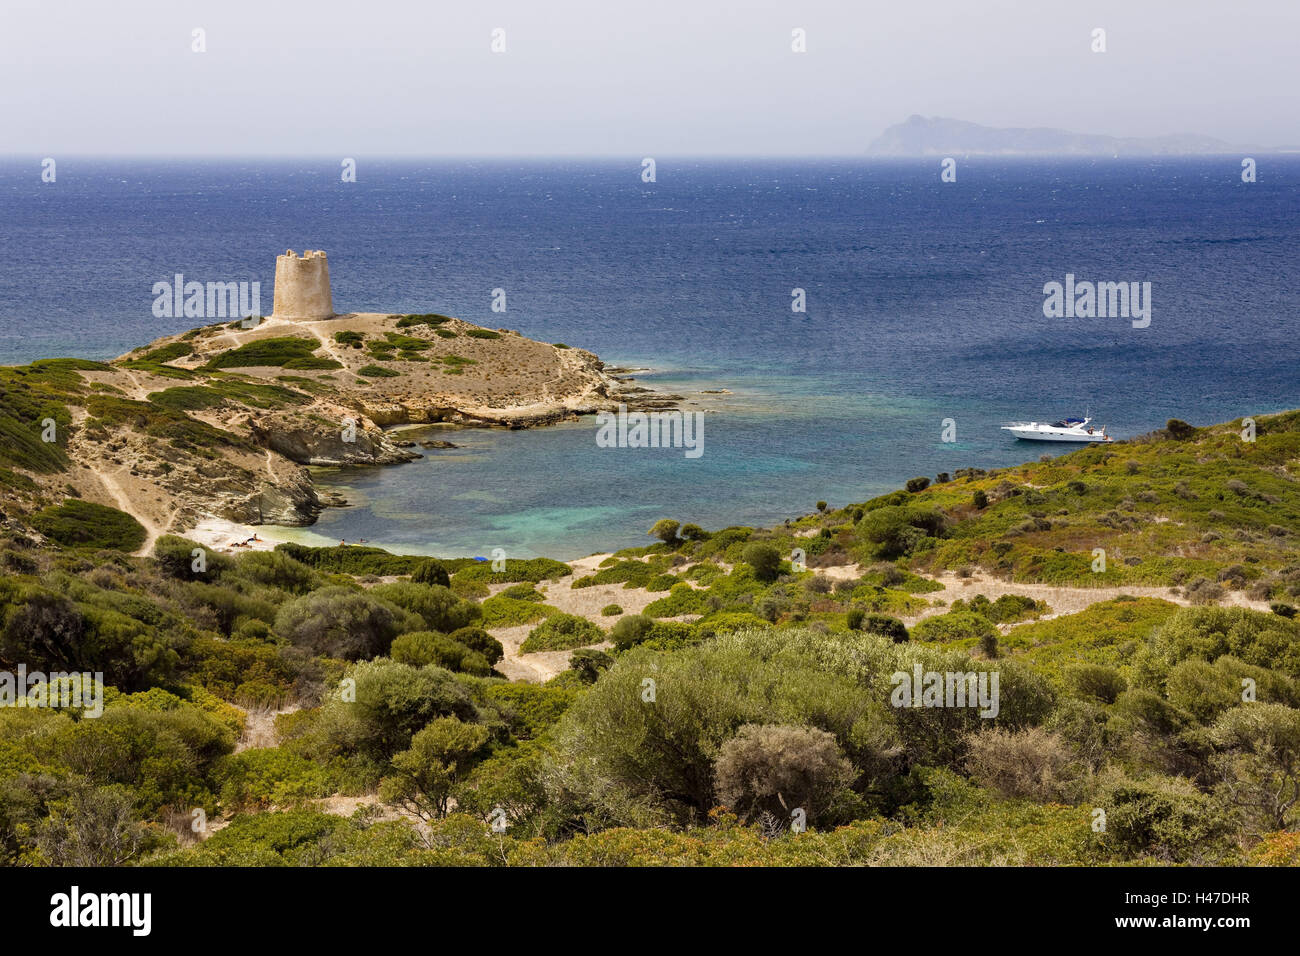 Italy, Sardinia, Costa del Sud, bay, beach, Torre di Piscinni, Sea, Yacht, Europe, South Europe, South Coast, building, historic, tower, watchtower, tower, Saracen tower, ship, motorboat, moored, people bathe, bay, beach, idyllic, landscape, coastal lands Stock Photo